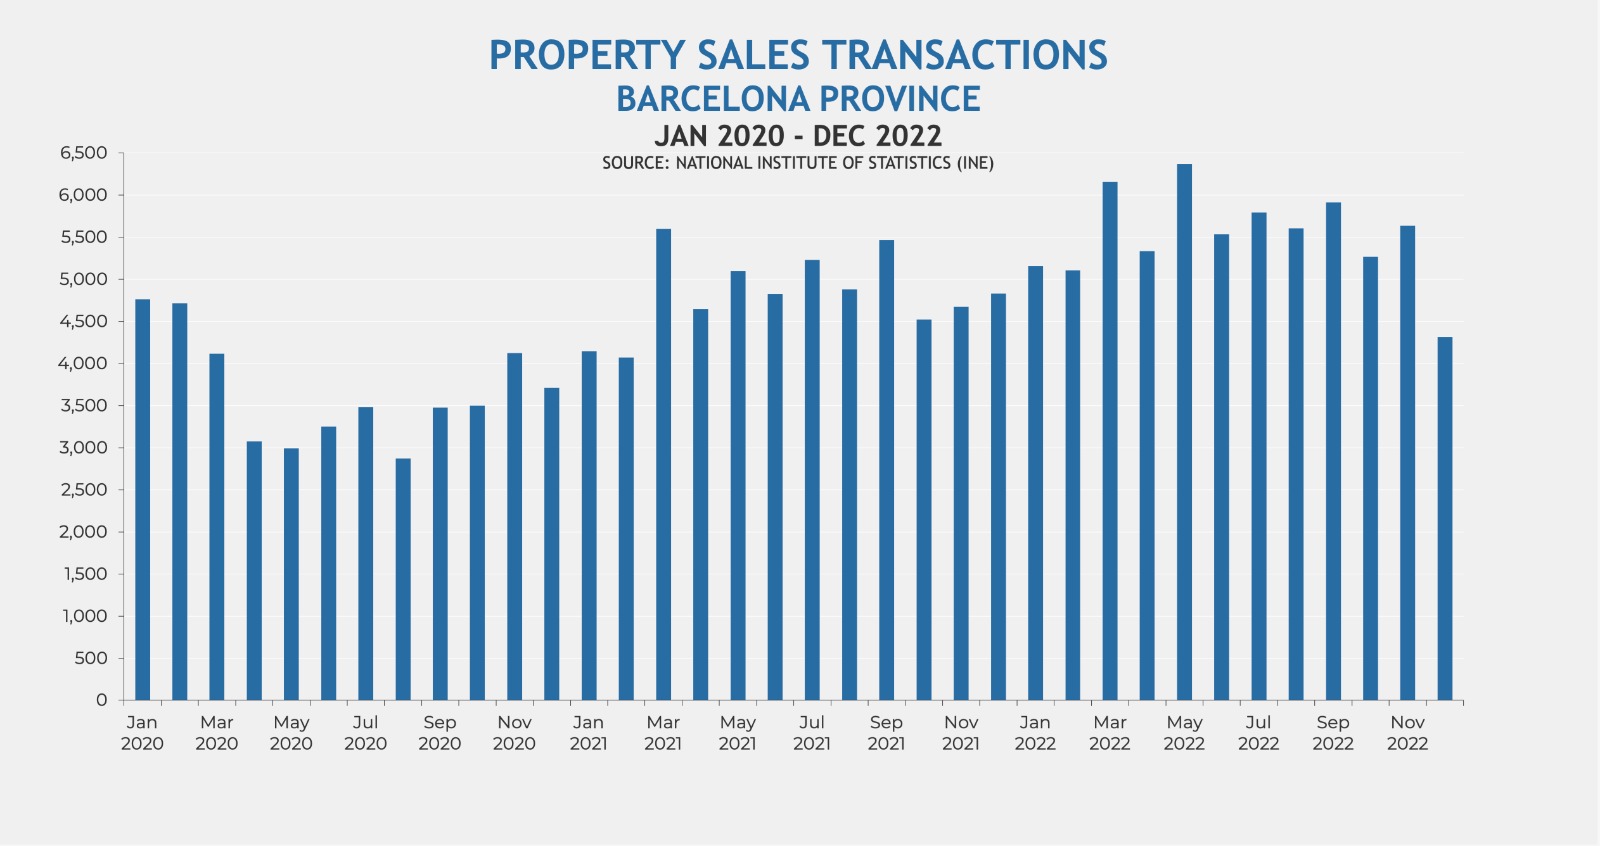 Sales transactions in Barcelona province